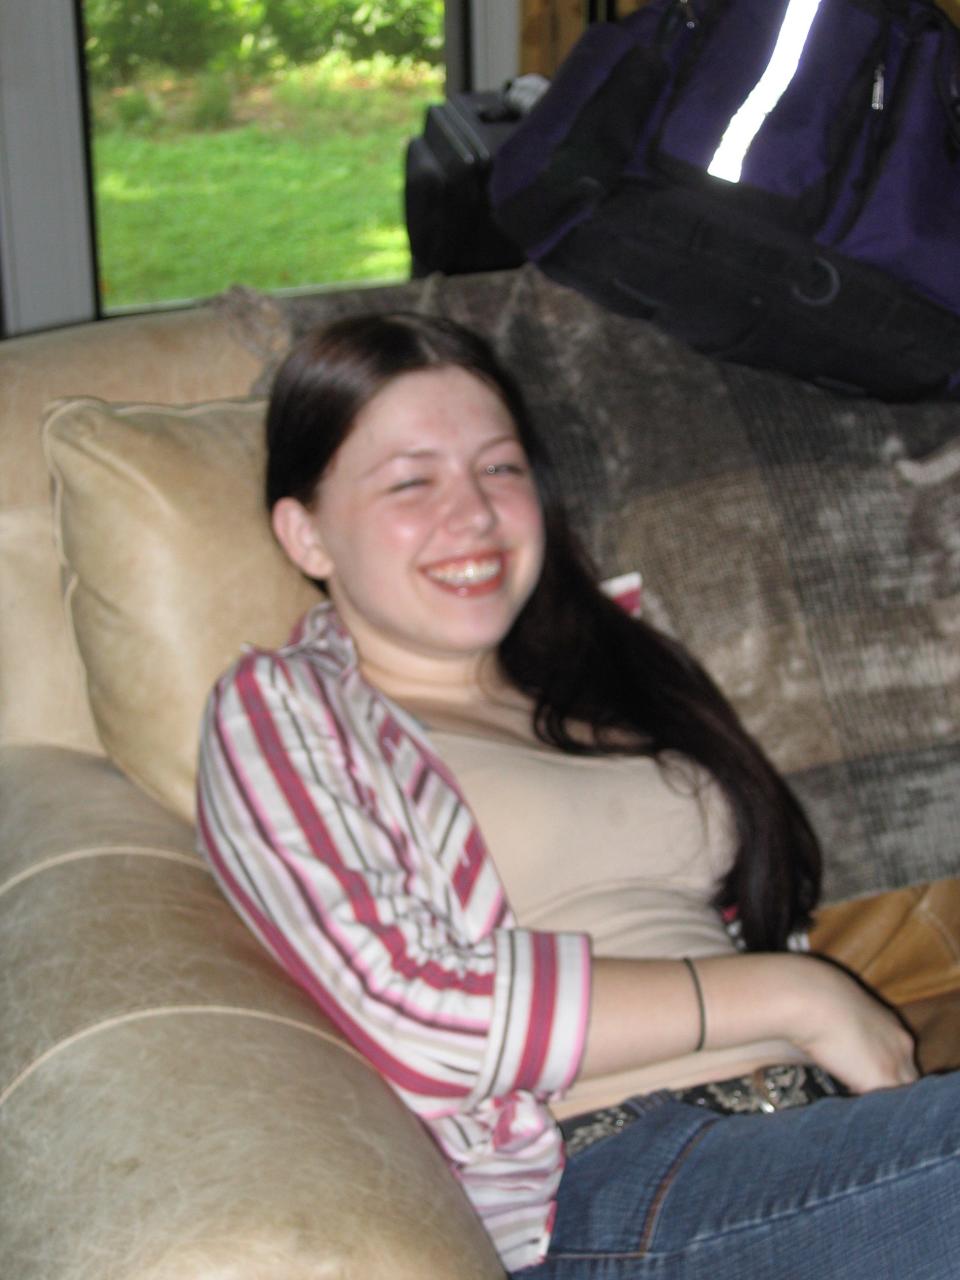 Jennifer Crecente is shown in July 2005, the summer before she was killed by her ex-boyfriend Justin Crabbe.